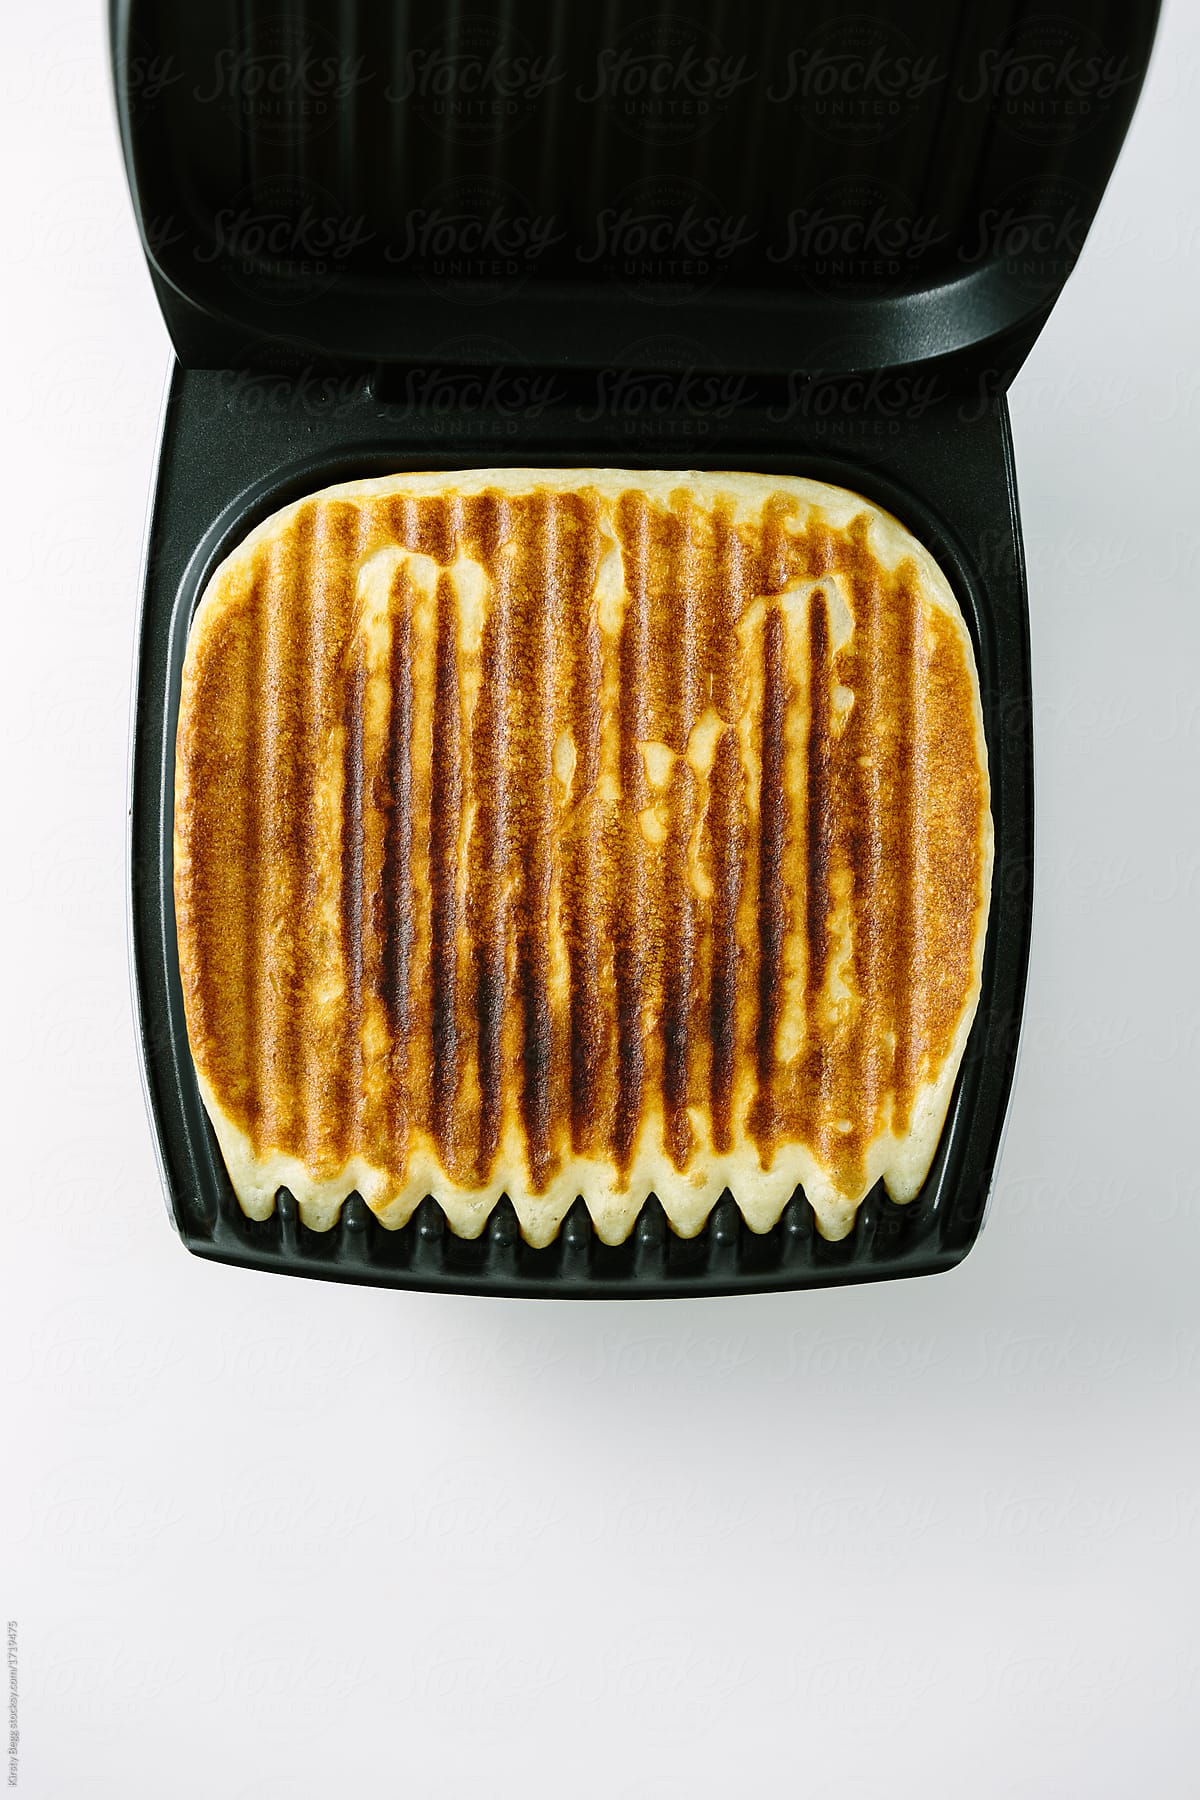 Grill or griddle with waffle batter cooked